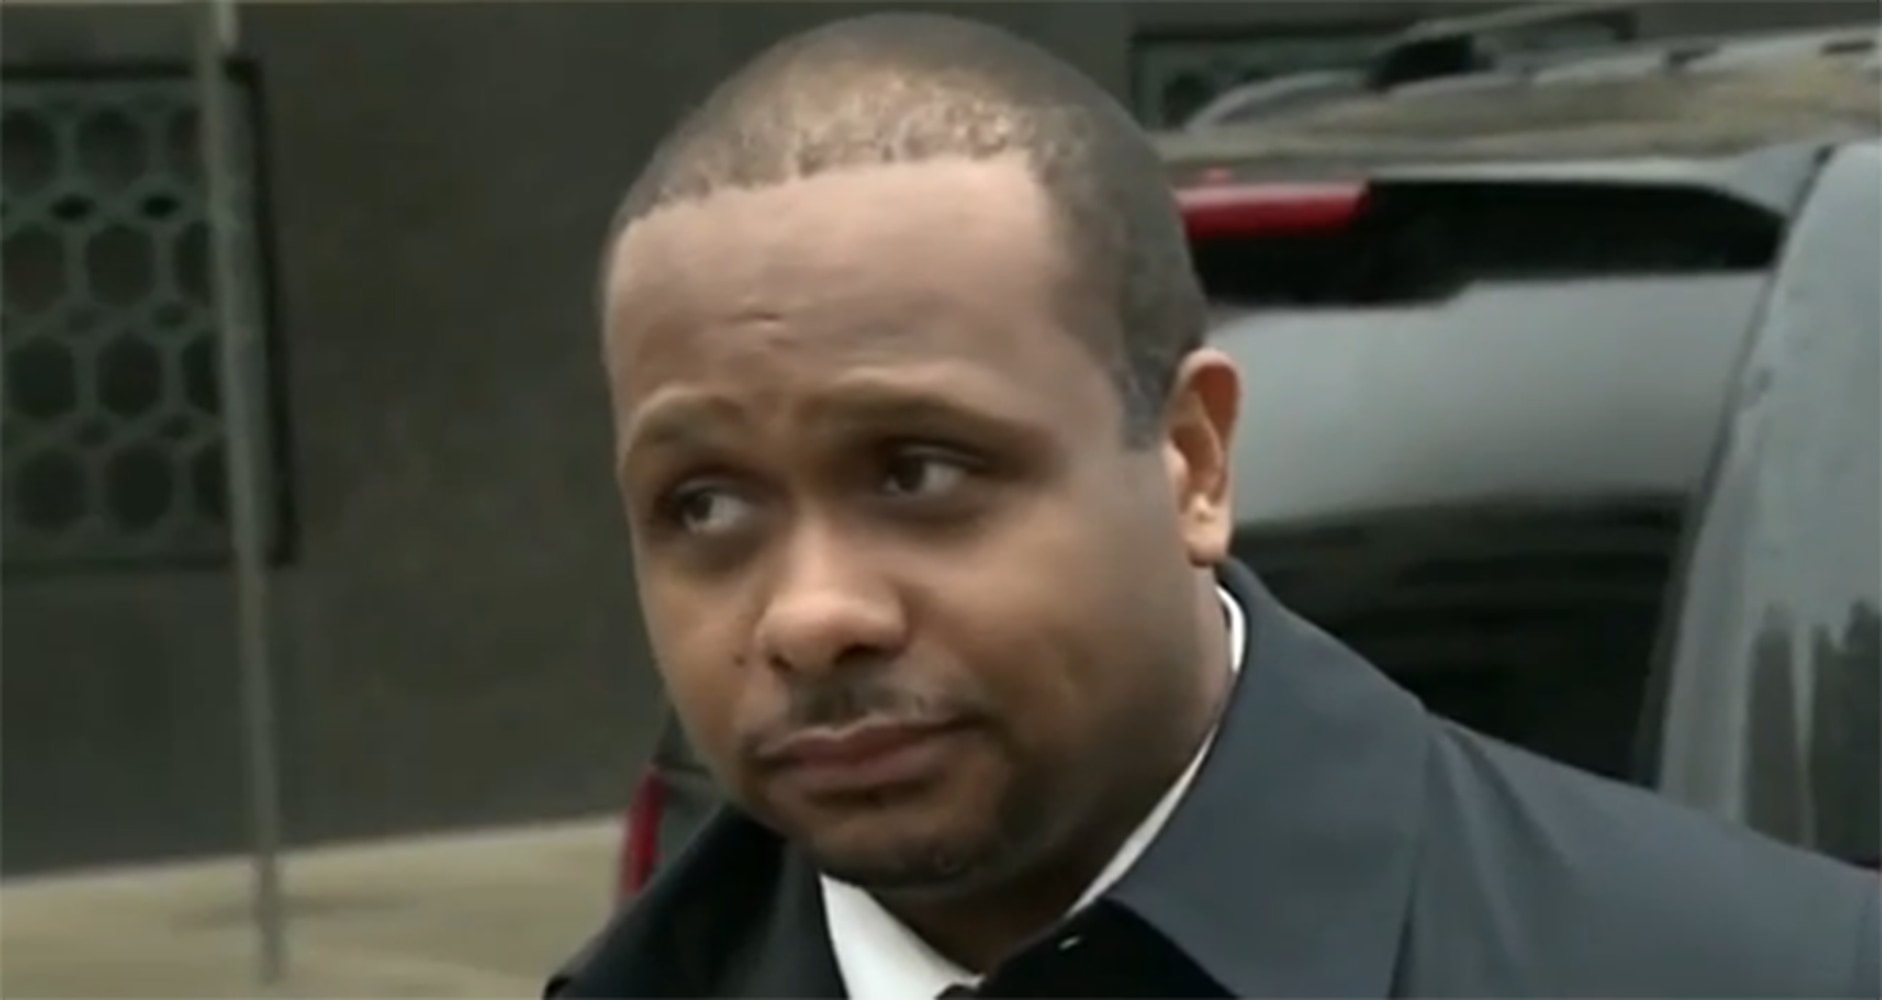 Detroit police officer David Hansberry leaves court on April 9. Hansberry is one of two Detroit police officers accused of robbing drug dealers and stealing ... - 150409-detroit-cop-hansberry-mn-2217_8628d7bbc84ea22b26fa50b8645e23b3.nbcnews-ux-2880-1000